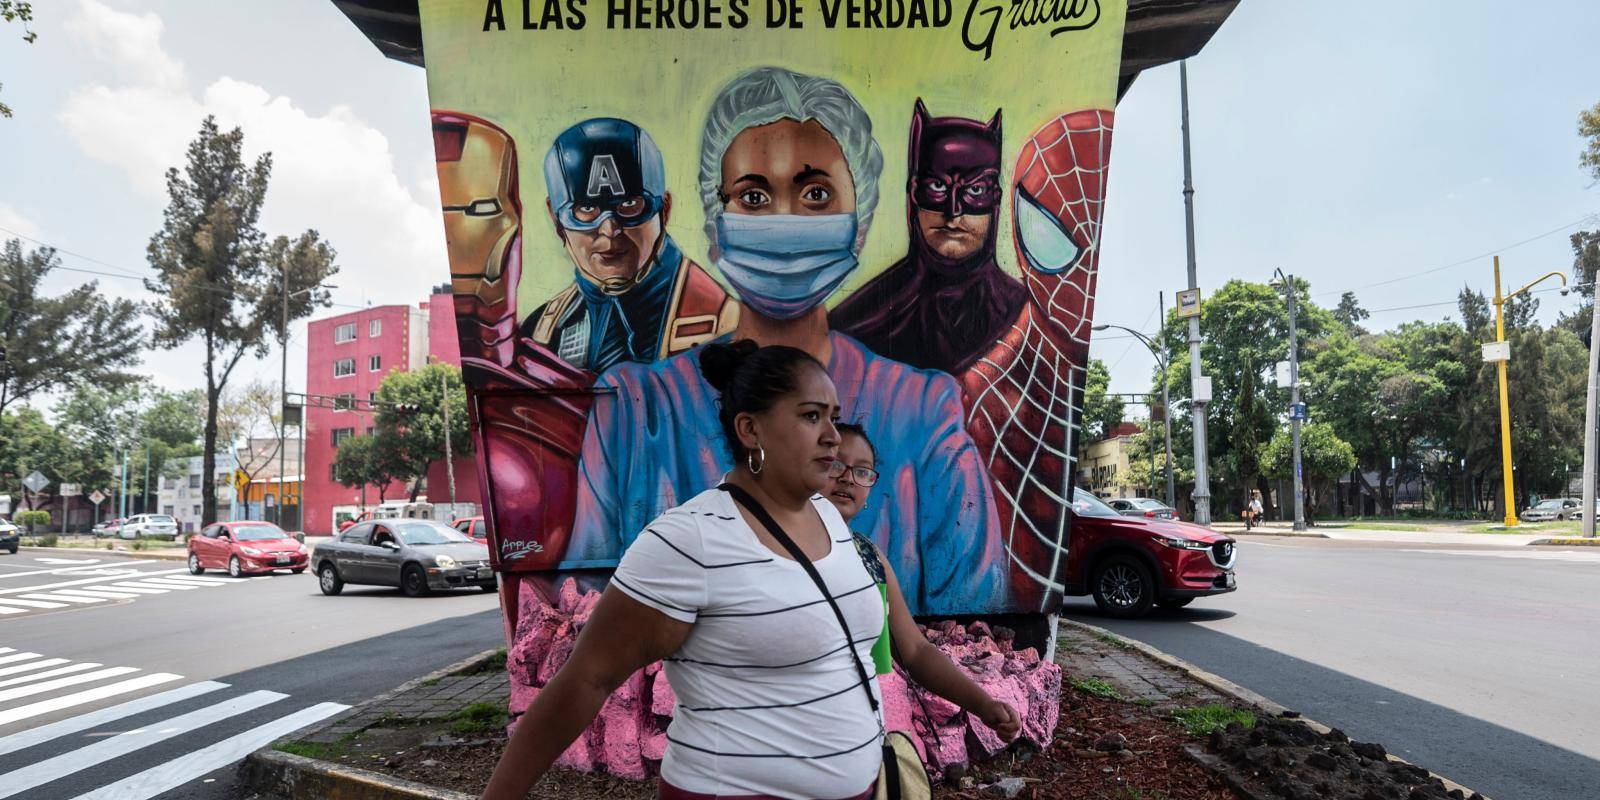 A woman walks past a mural showing a health worker and US superheroes, in Mexico City, on 21 July 2020. Photo credit: Copyright © Pedro Pardo/Getty Images